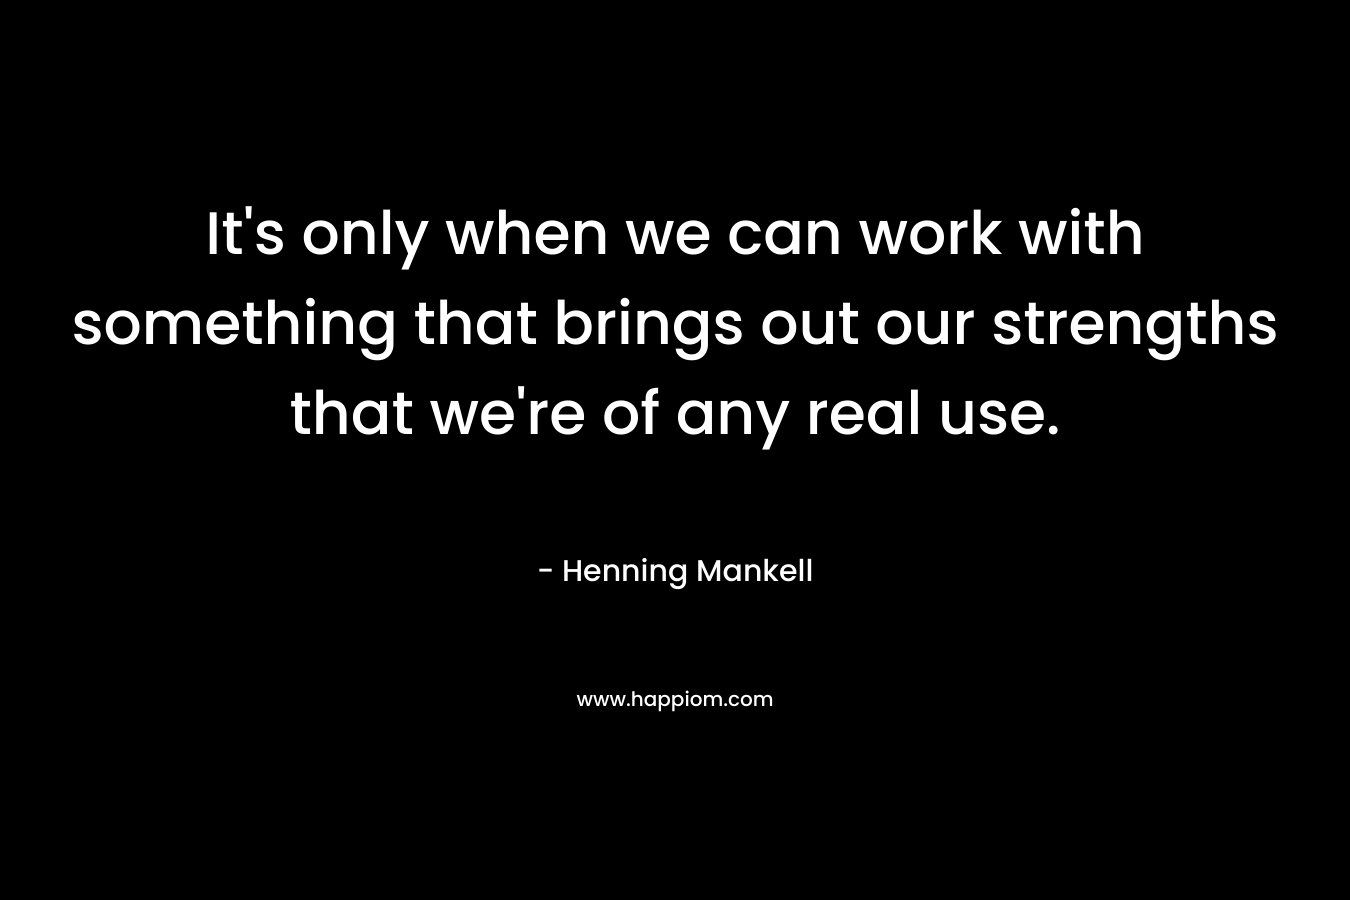 It's only when we can work with something that brings out our strengths that we're of any real use.